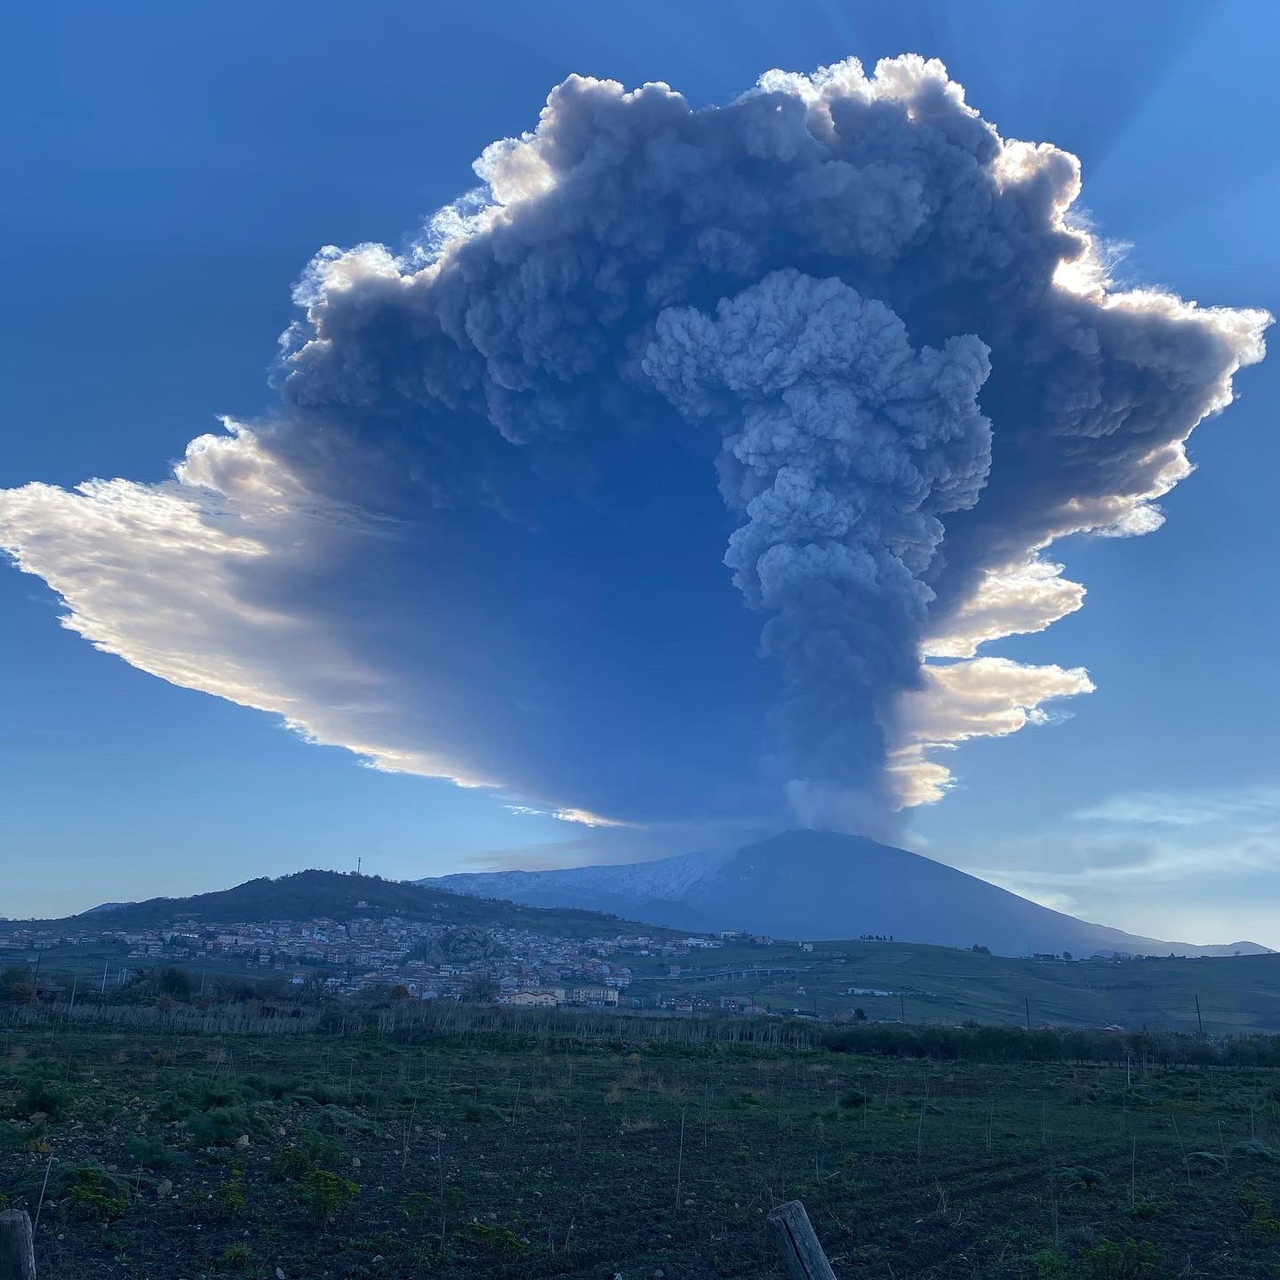 Top 93+ Images what type of volcanic eruption is shown in this photograph? Full HD, 2k, 4k